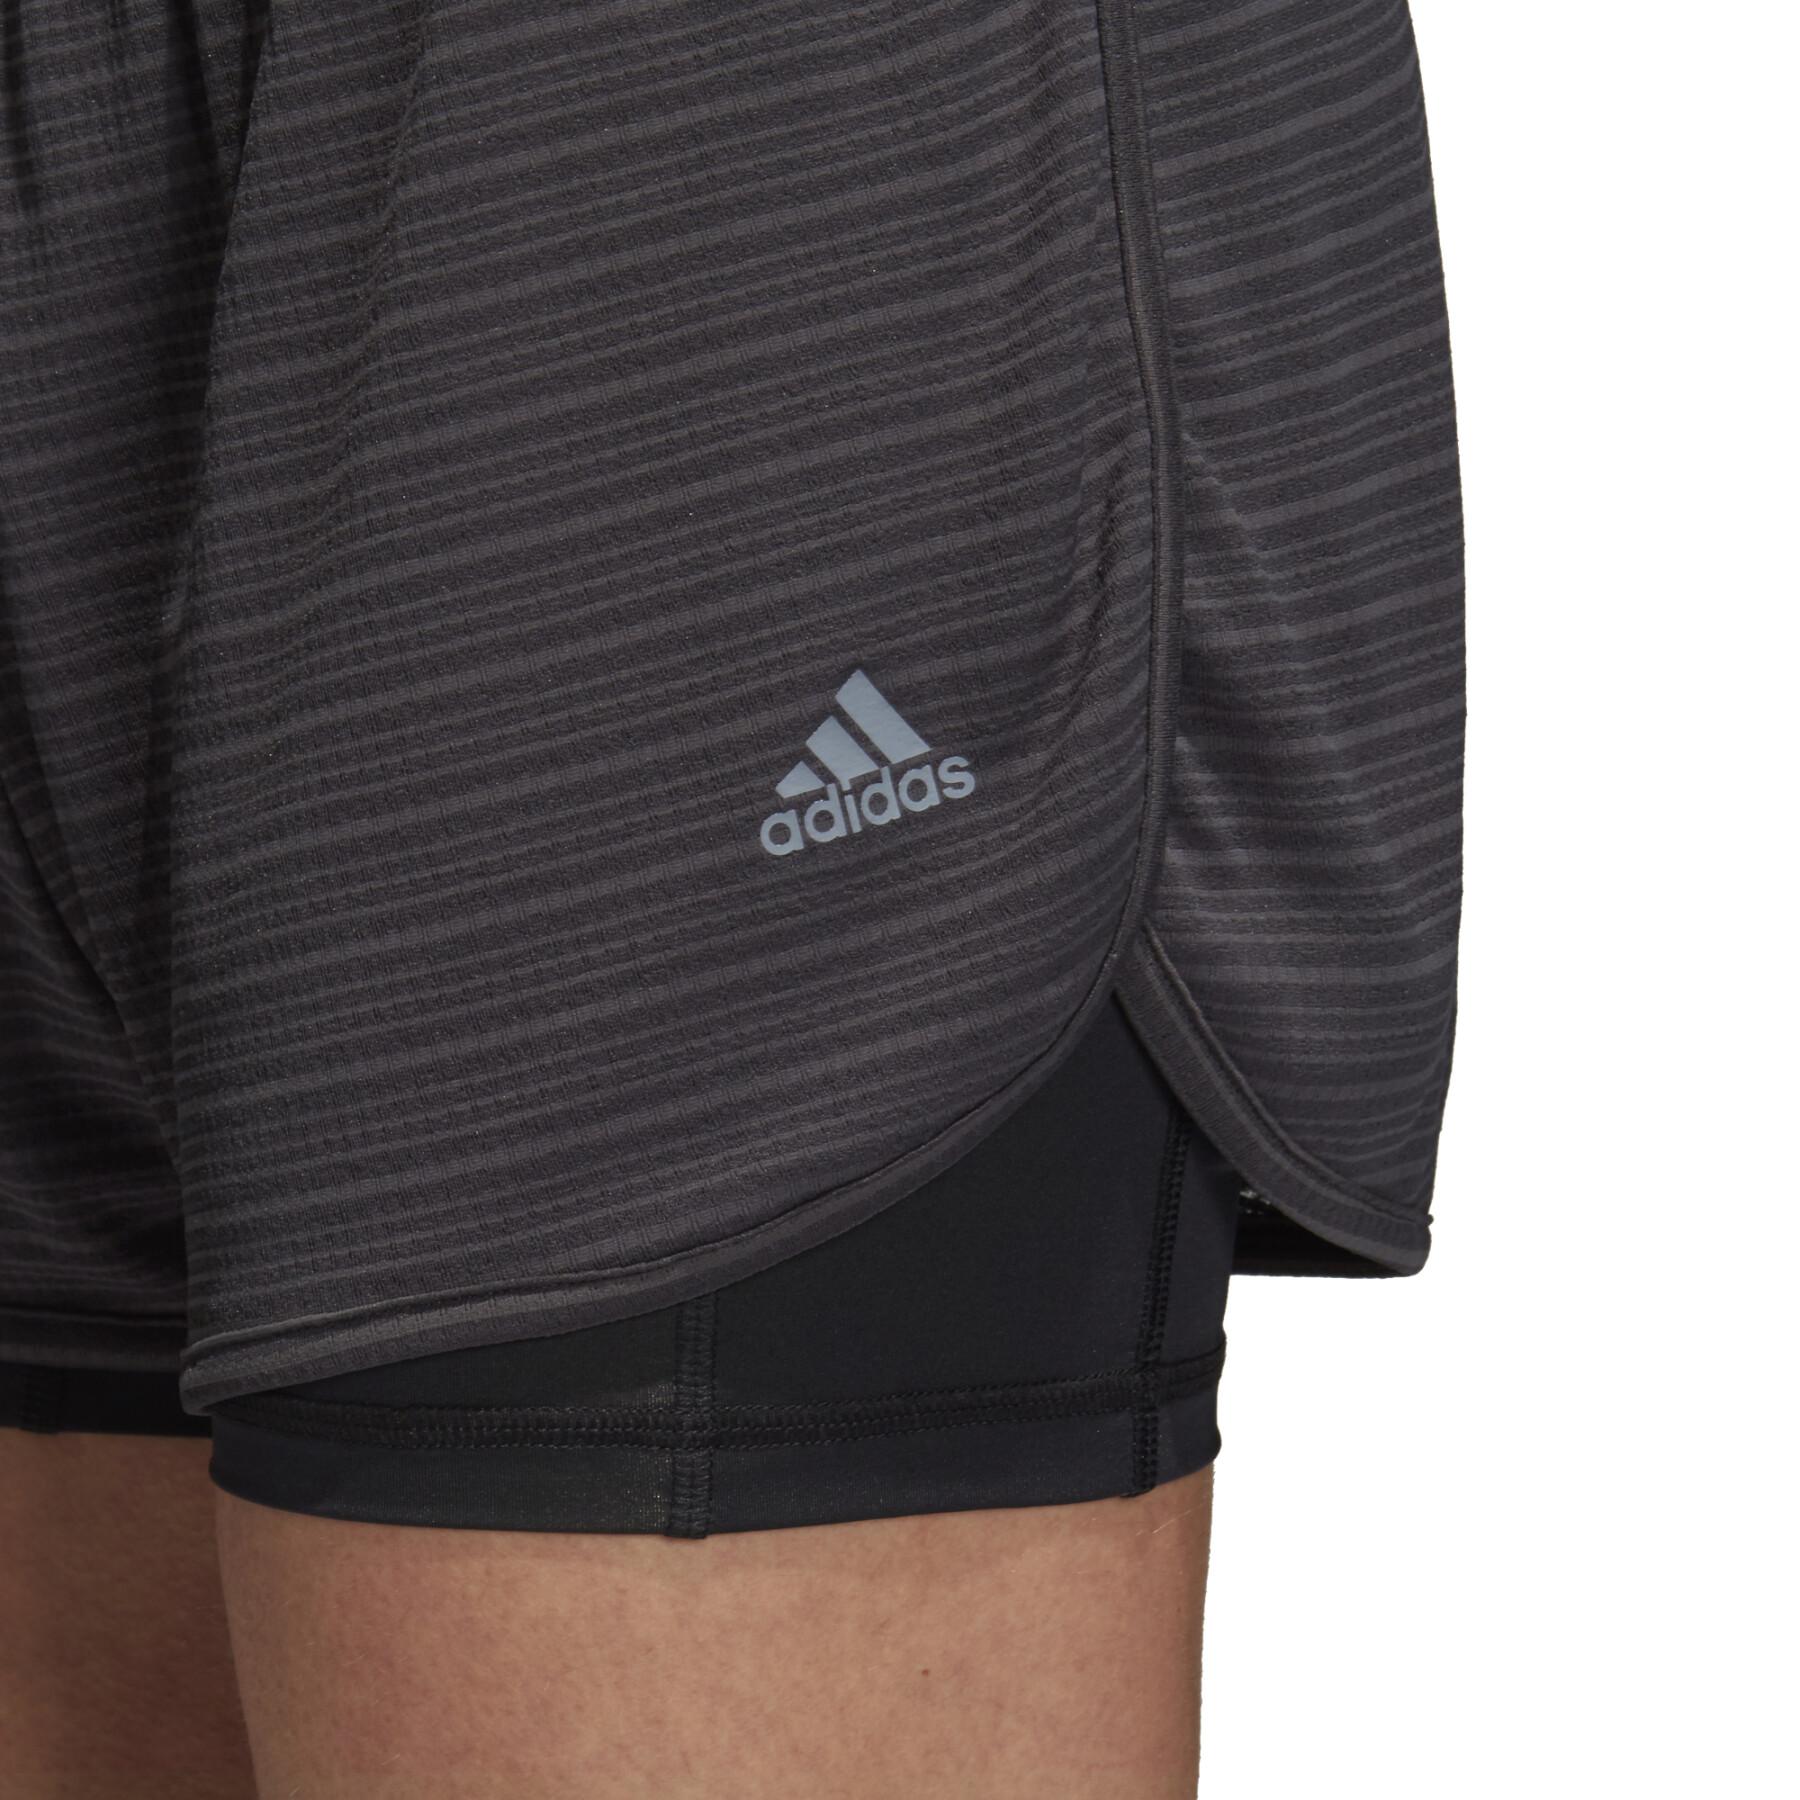 Damesshort adidasTwo-in-One Chill